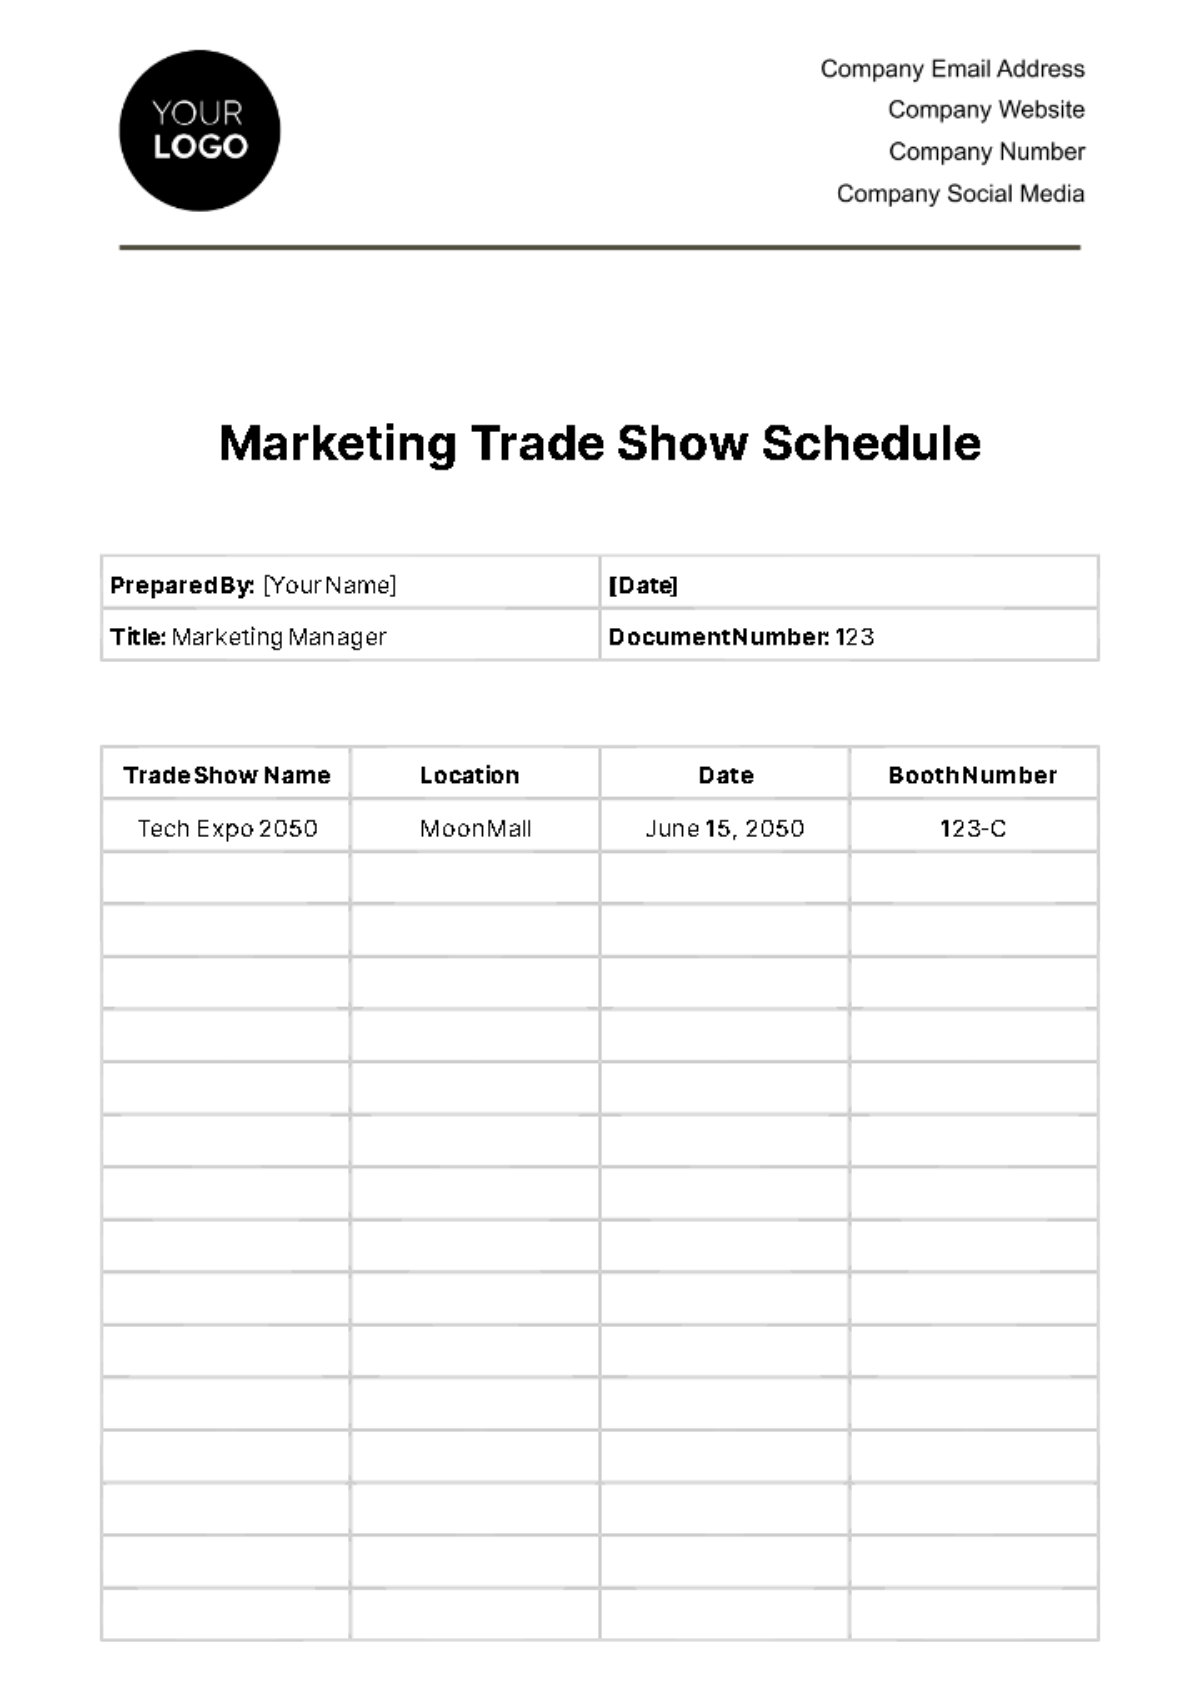 Free Marketing Trade Show Schedule Template